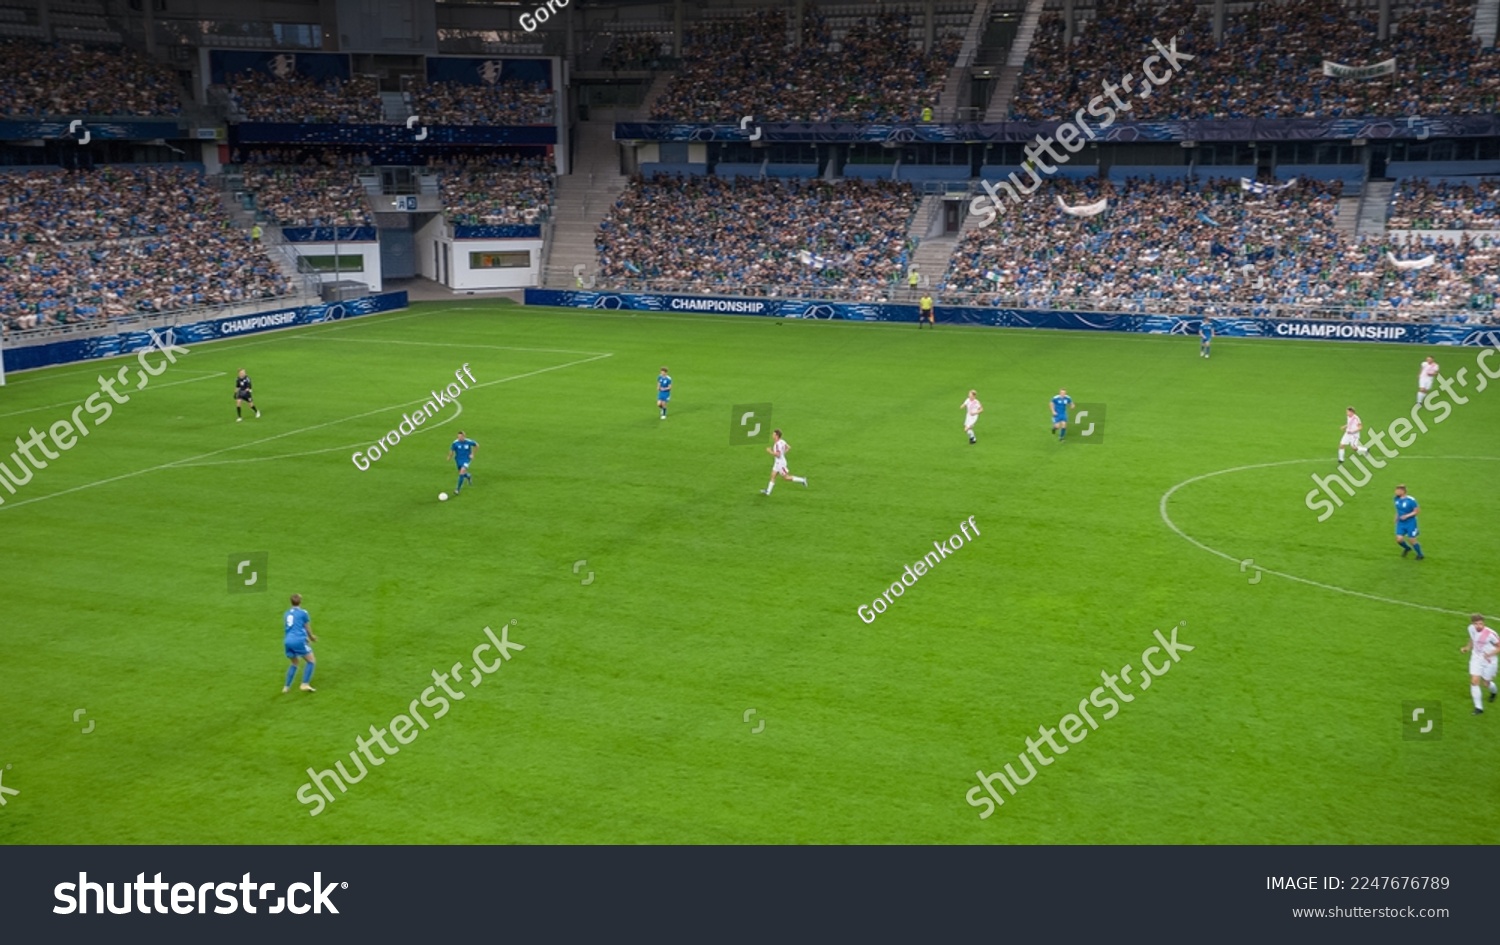 Soccer Football Championship Stadium with Crowd of Fans: Blue Team Forward Attacks, Dribbles, Players Defending The Goals, Ready To Counterattack. Sport Channel Broadcast Television. High Angle Wide. #2247676789